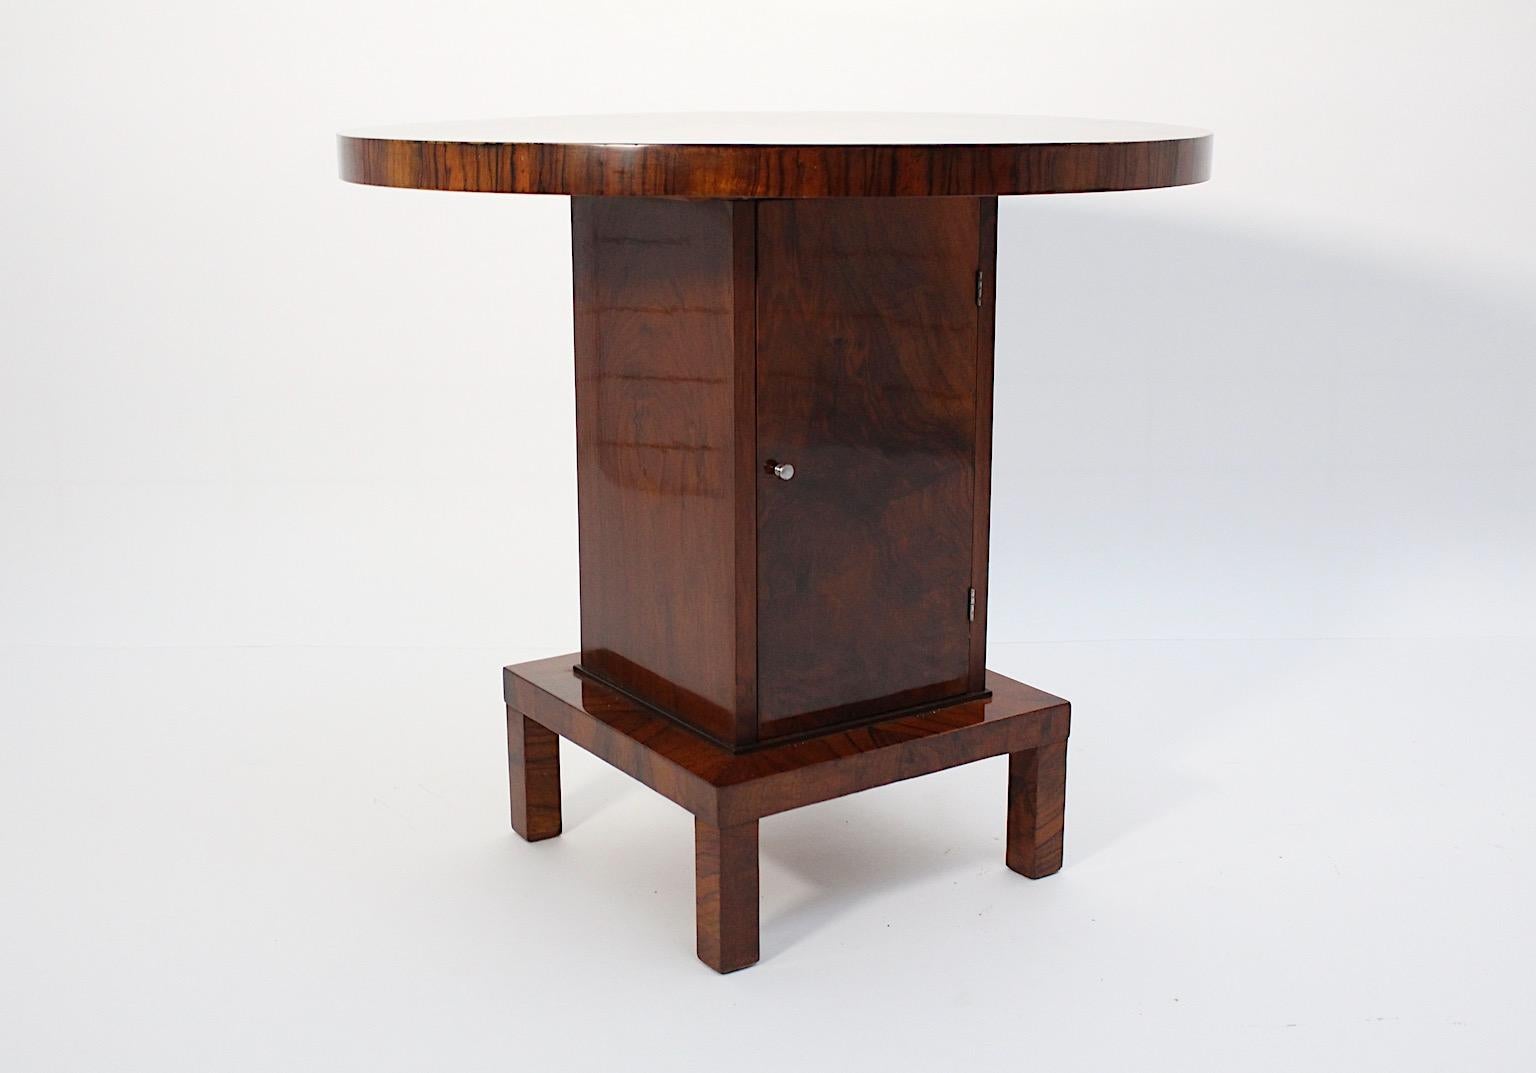 Art Deco vintage geometric sculptural side table side table from walnut in the style of Ludwig Schmitt circa 1930 Austria.
An amazing side table, very similar to Ludwig Schmitt furniture maker, with a circular plate and a rectangular integrated